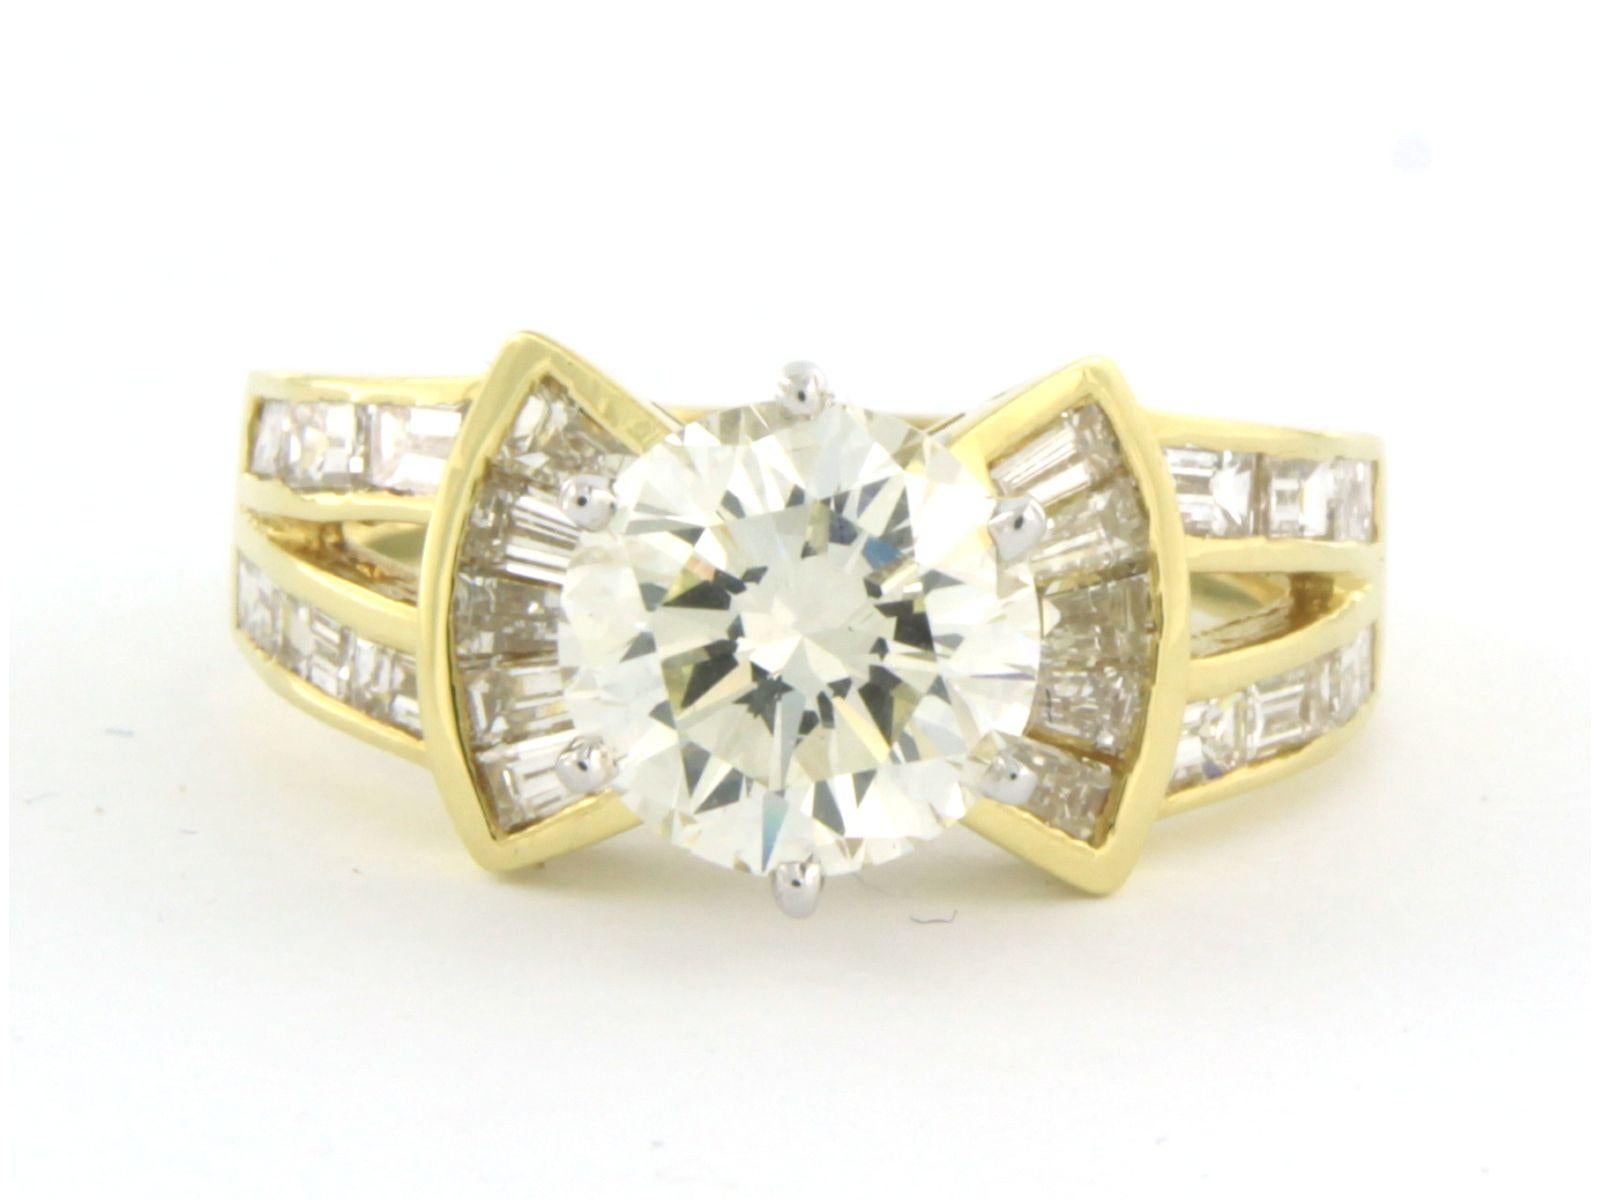 18k bicolor gold ring set with a center brilliant cut diamond. 2.20ct - N/O - VS/SI - and taper and baquet cut diamonds up to. 1.20ct - F/G - VS/SI - ring size U.S. 7.25 - EU. 17.5 (55)

detailed description:

the top of the ring is 9.6 mm wide by